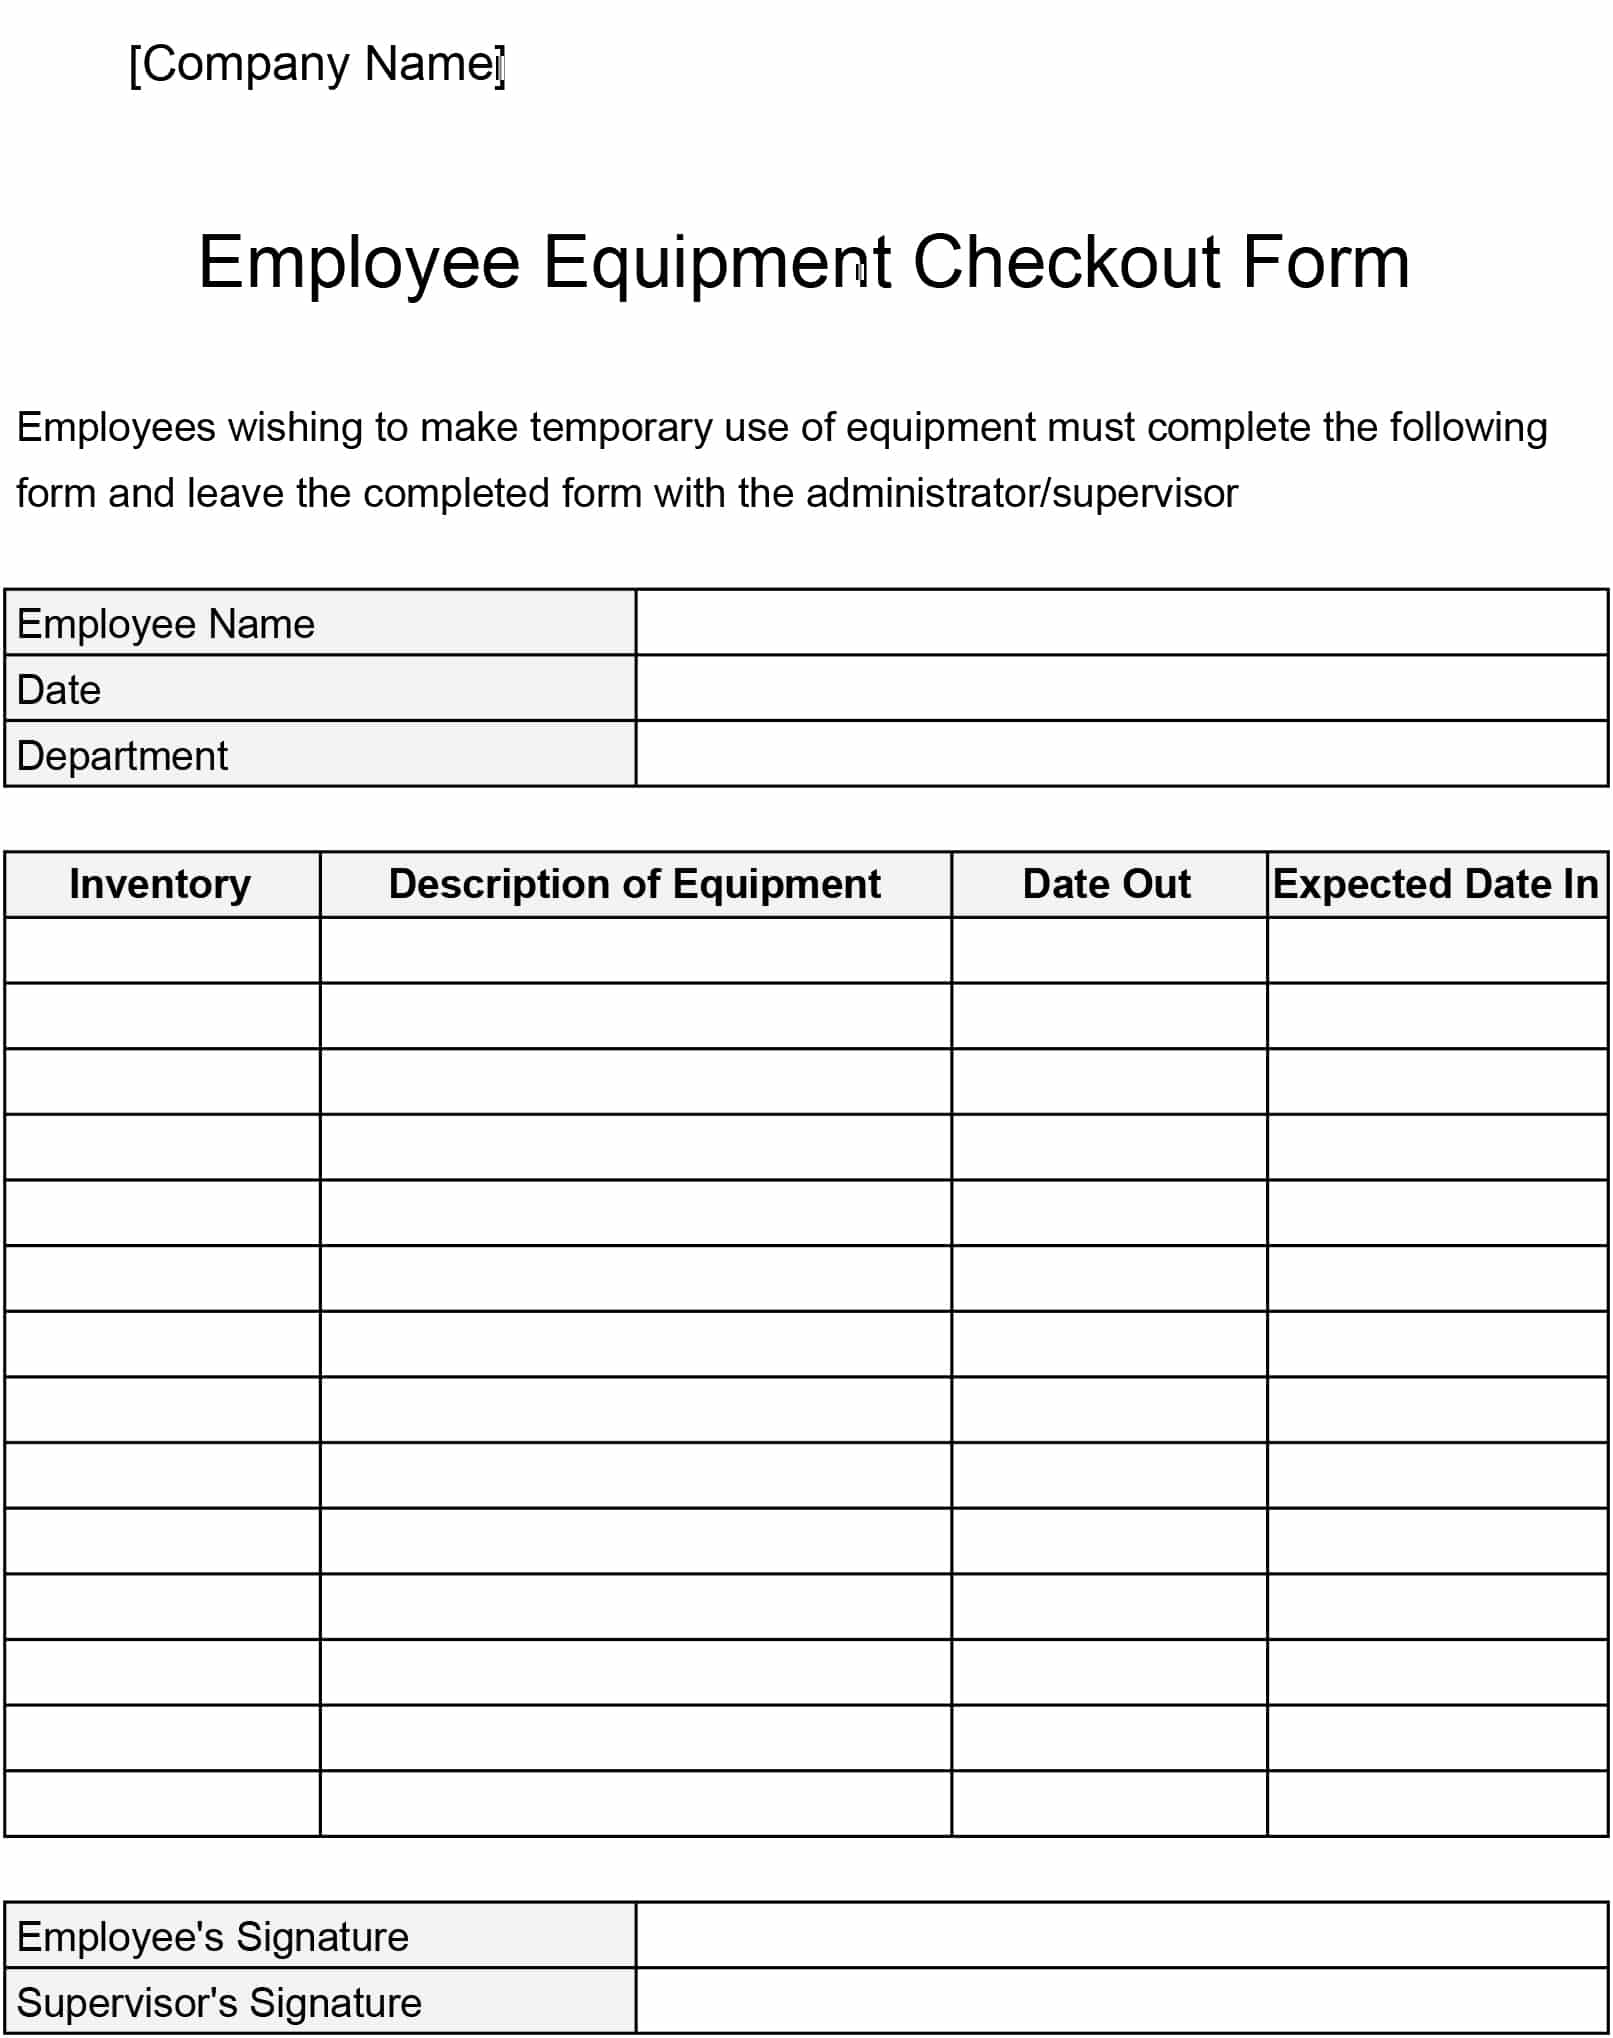 Employee Equipment Checkout Form